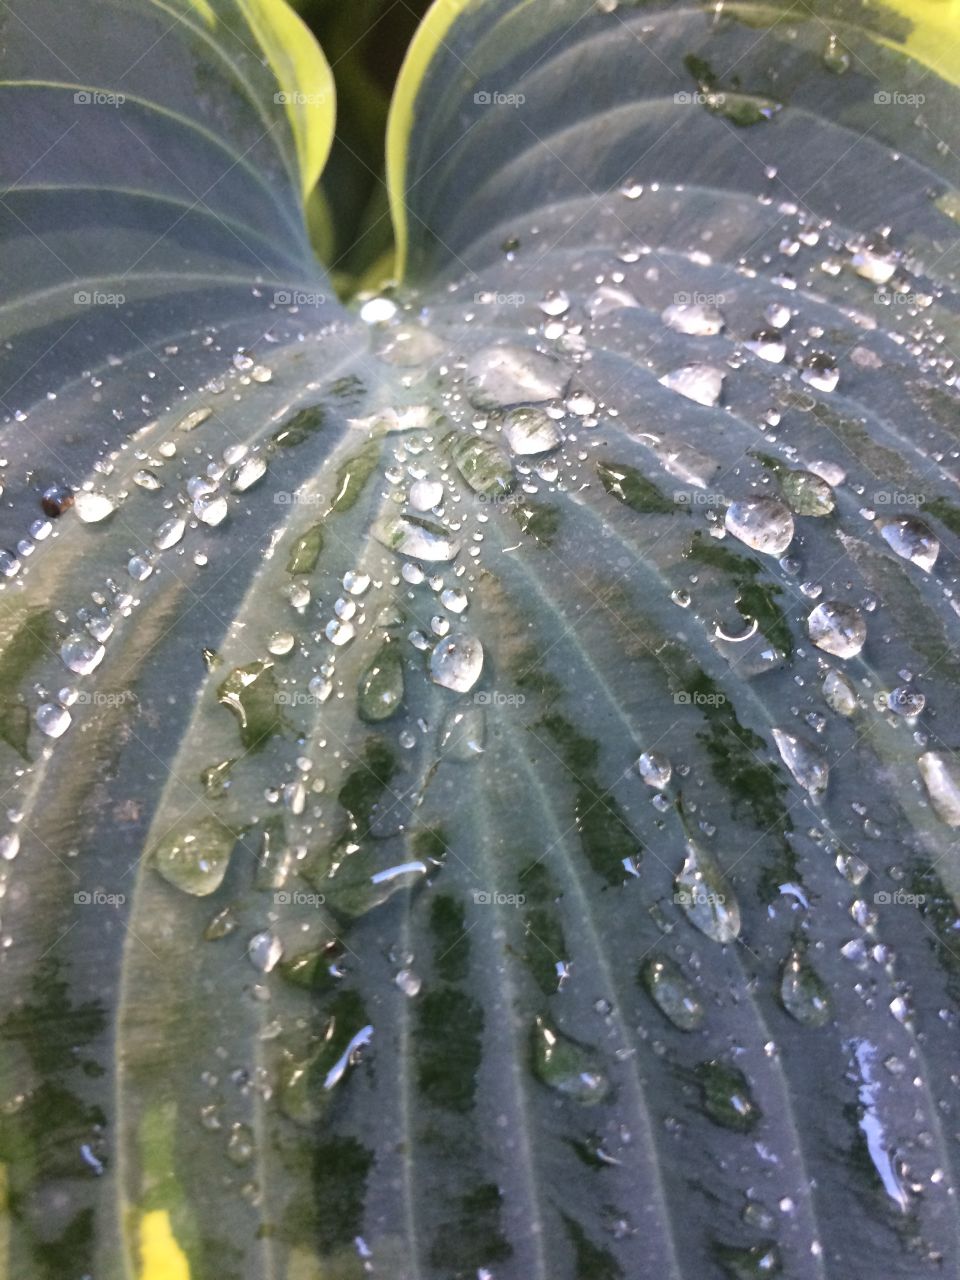 Water drops upon a leave
